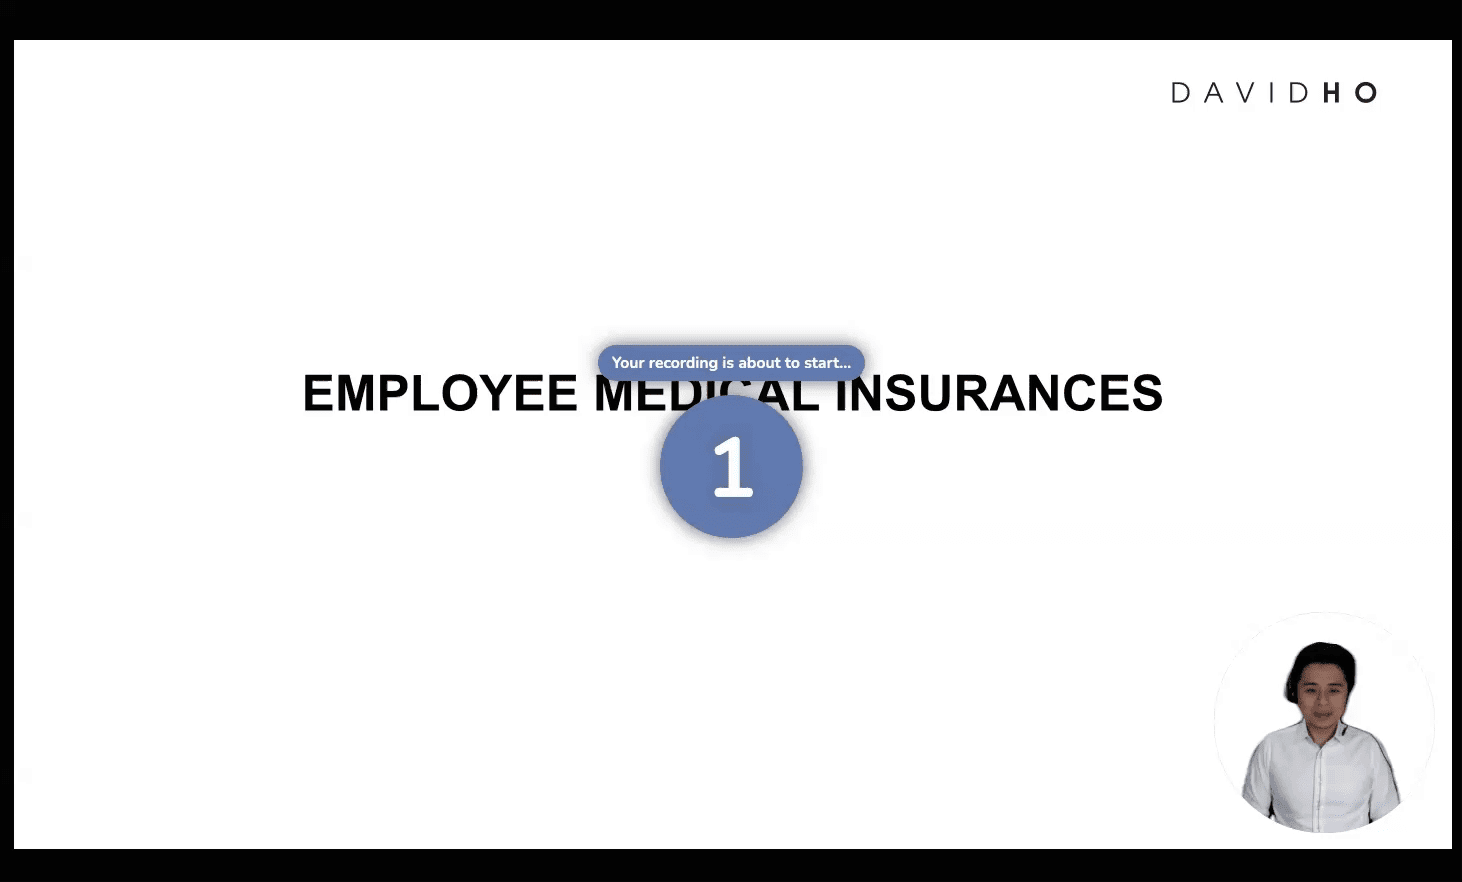 Employee medical insurances 1 - davido offers comprehensive group health insurance plans in Singapore, providing employees with valuable medical benefits.